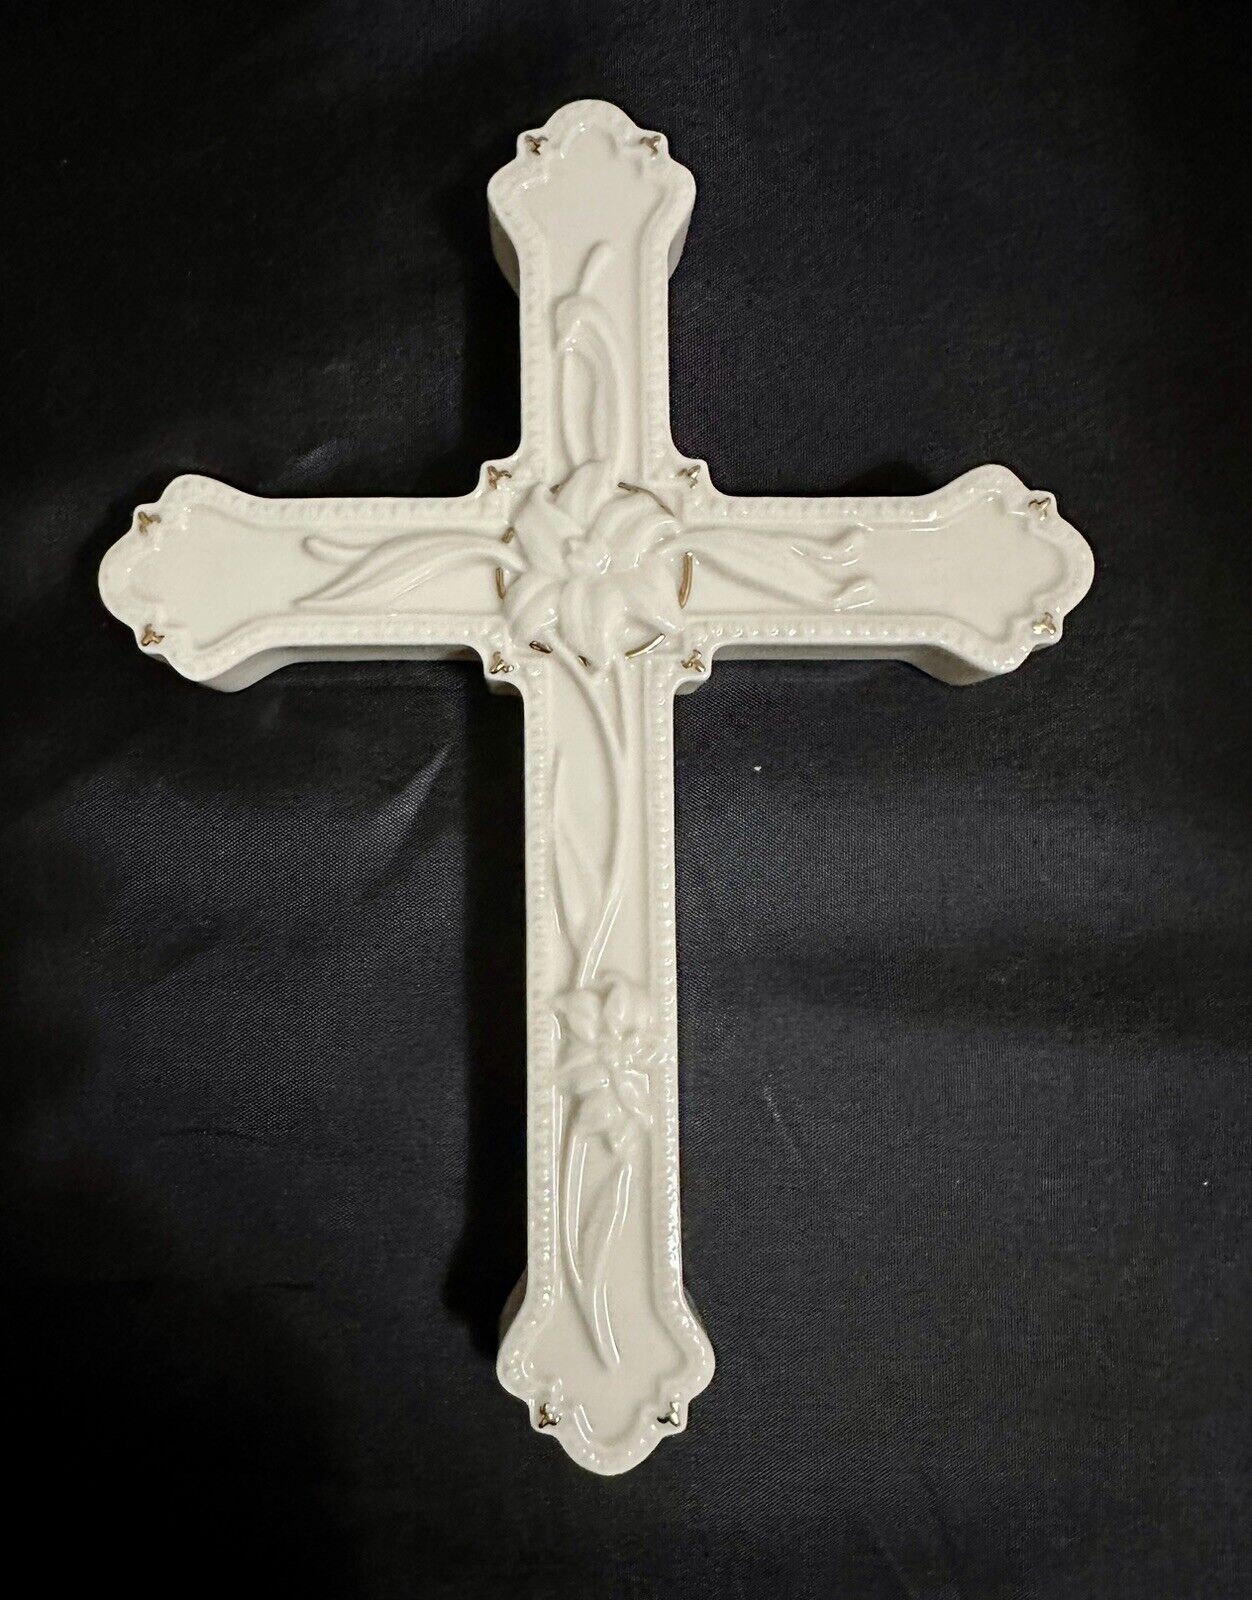 LENOX FINE PORCELAIN IVORY LILY HANGING WALL CROSS WITH GOLD ACCENTS Vintage